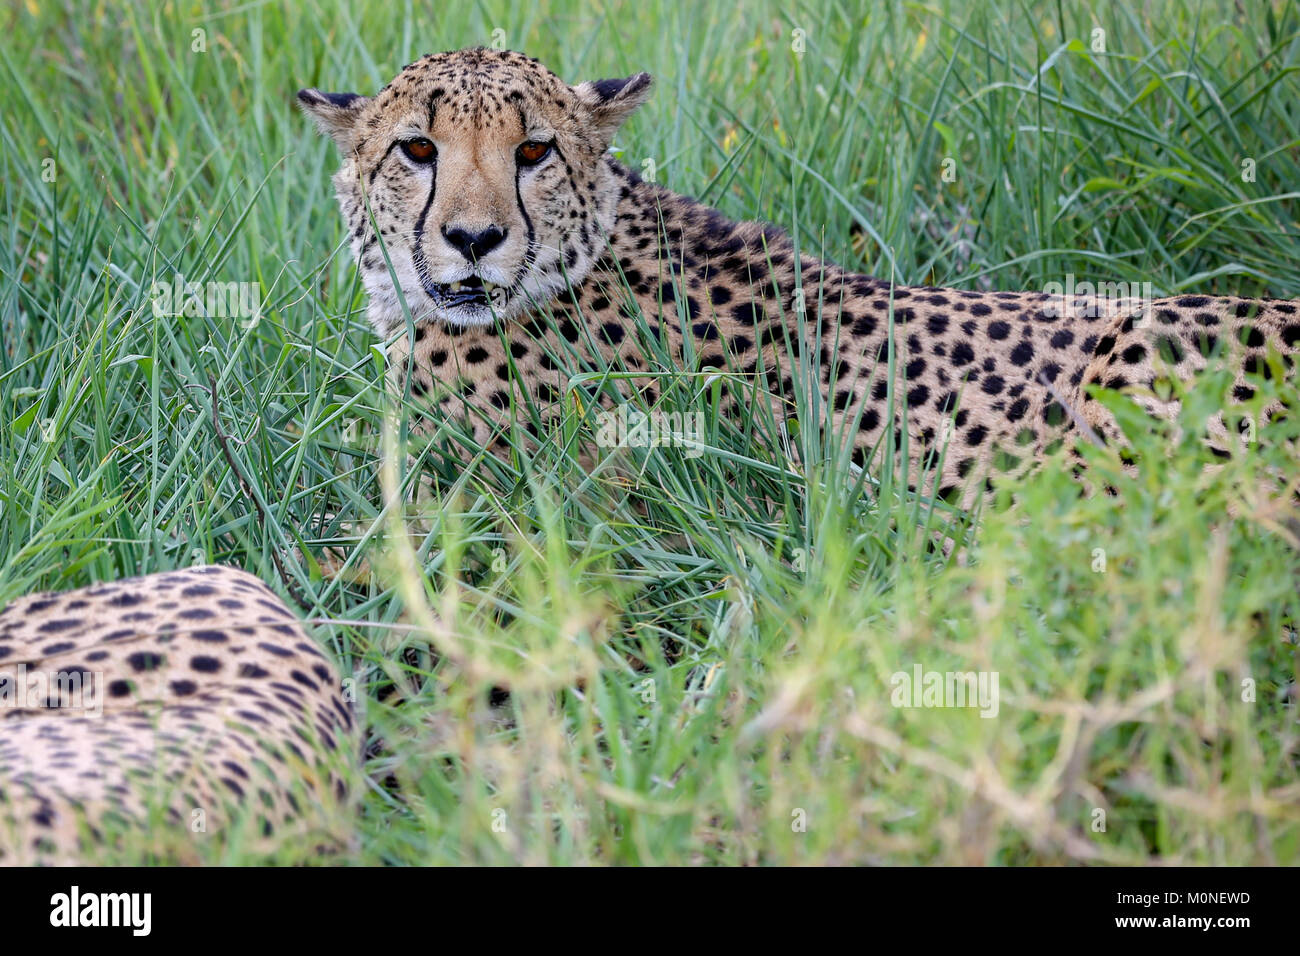 Male Cheetah looking directly at camera lying in long shady grassland with blurred grass foreground Stock Photo